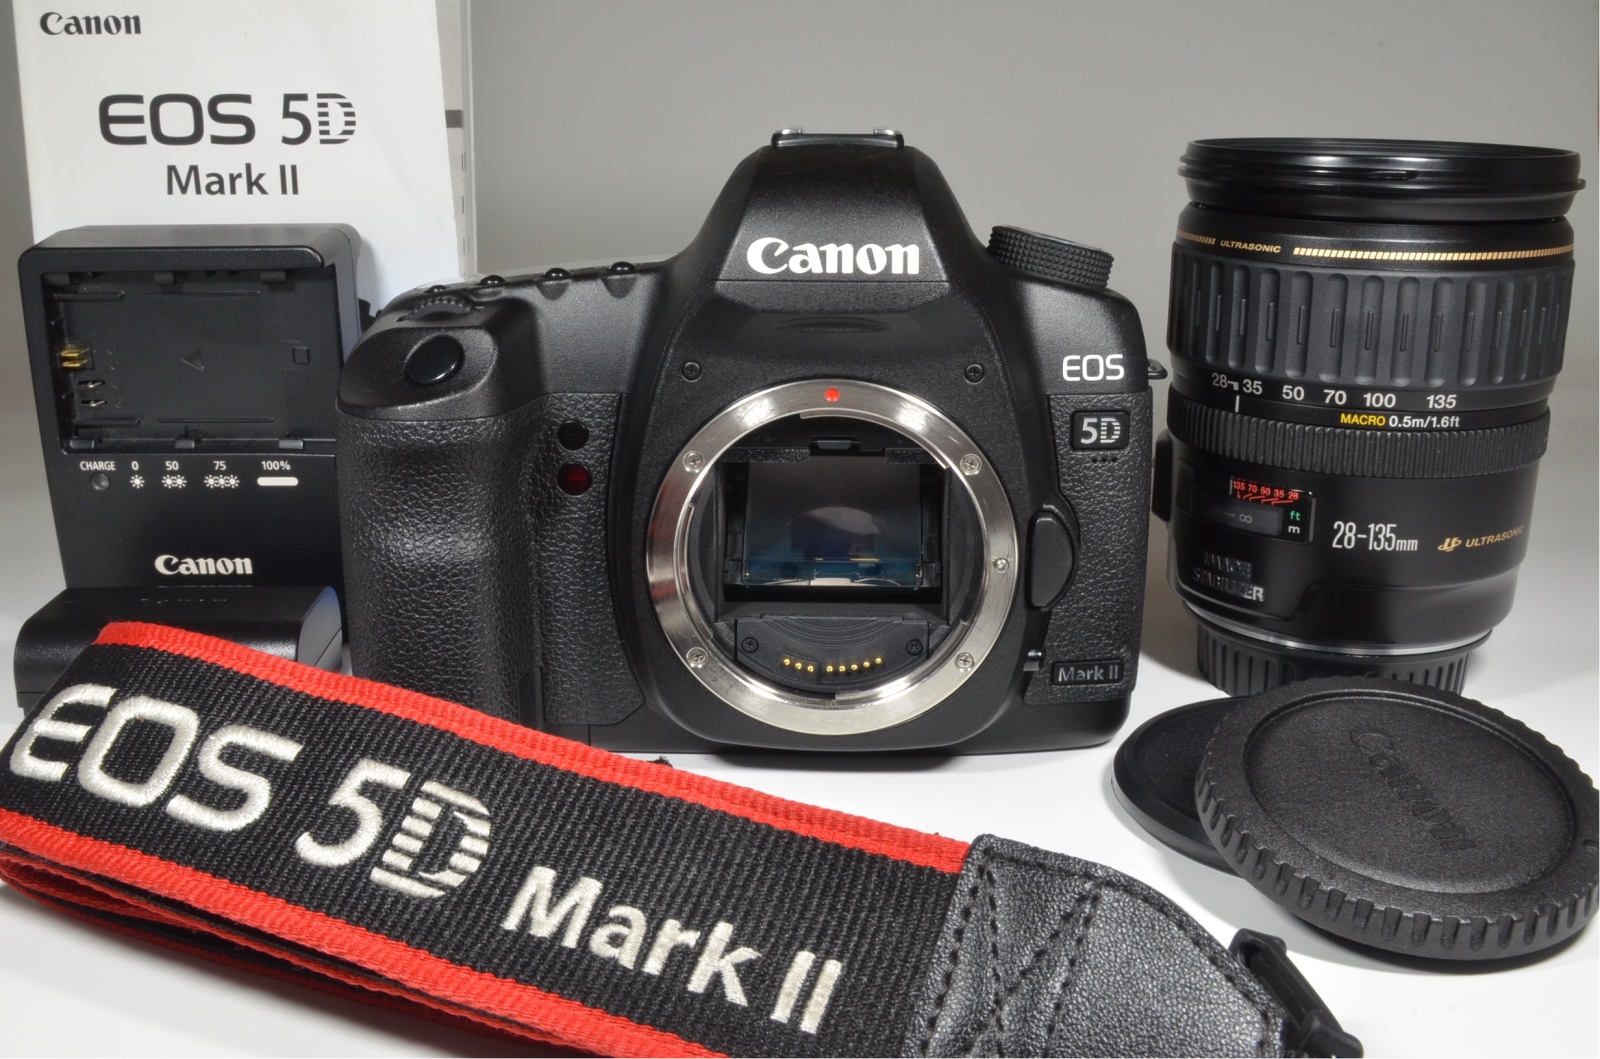 CANON EOS 5D Mark II with EF 28-135mm f3.5-5.6 IS USM #a0337